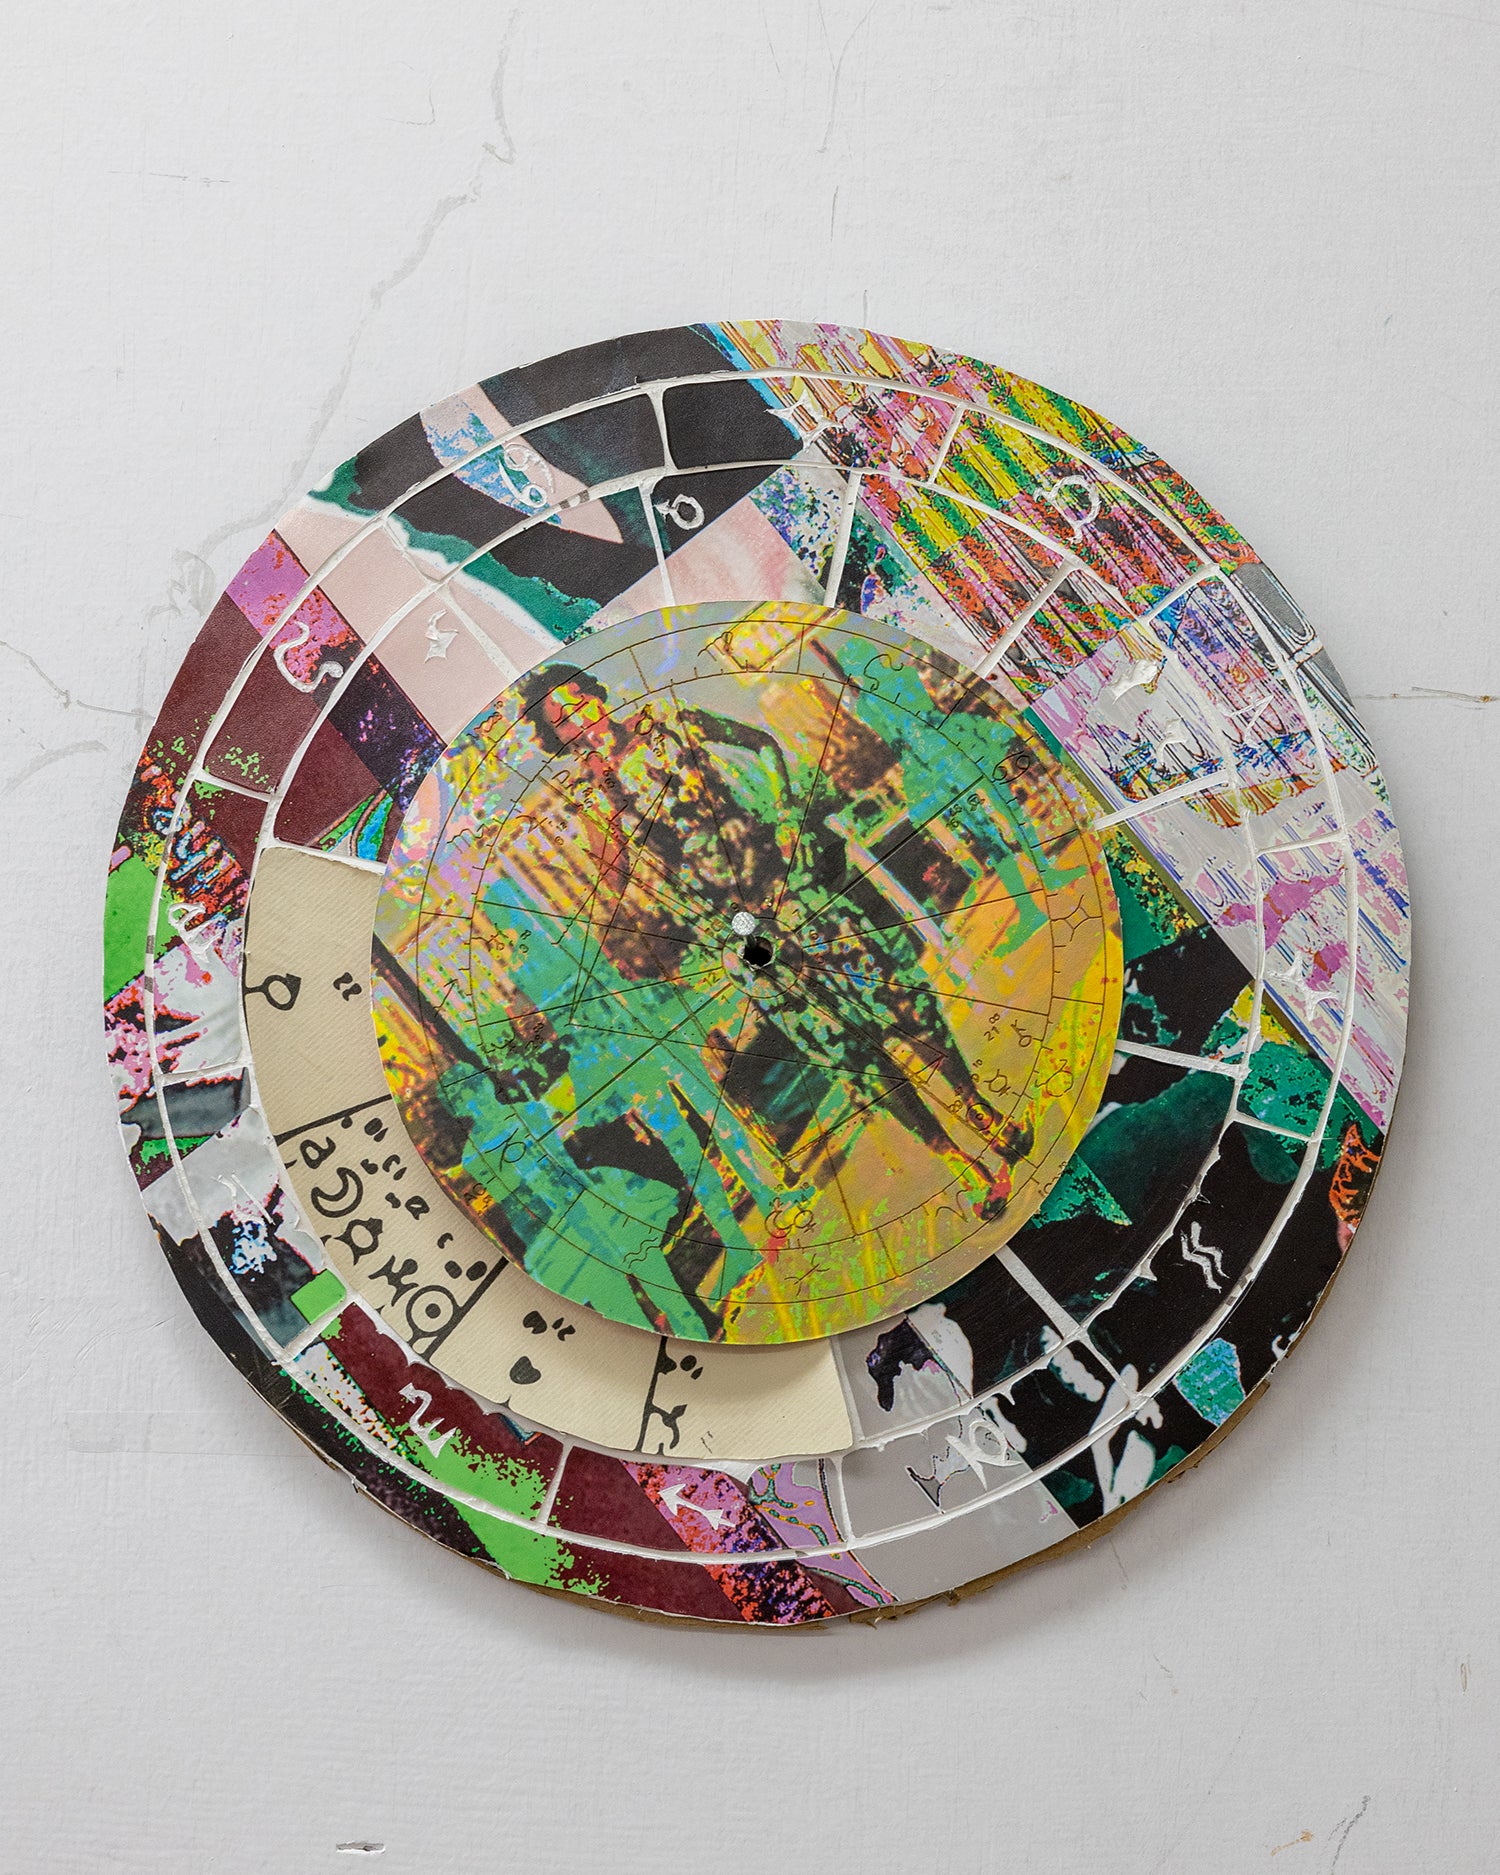 Circular collage featuring photos and astrological inscriptions